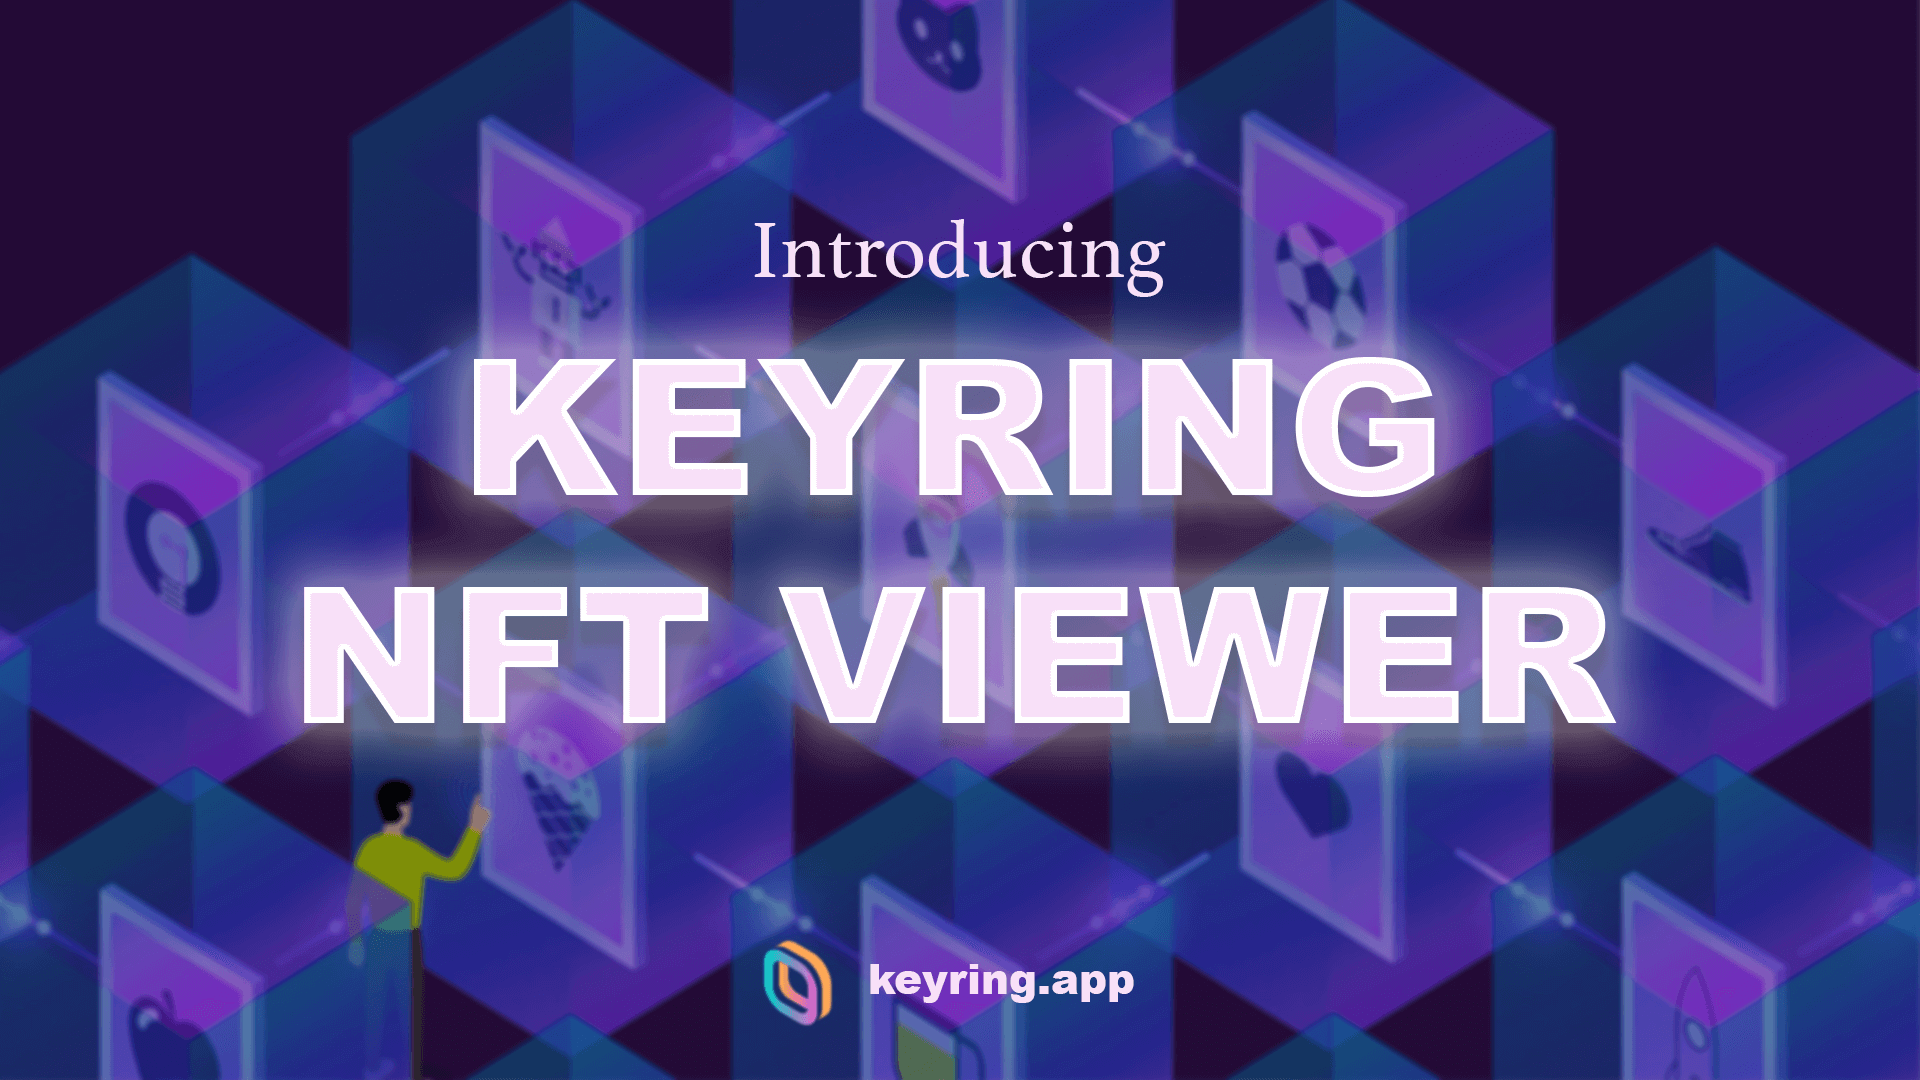 How to View NFT with KEYRING NFT VIEWER